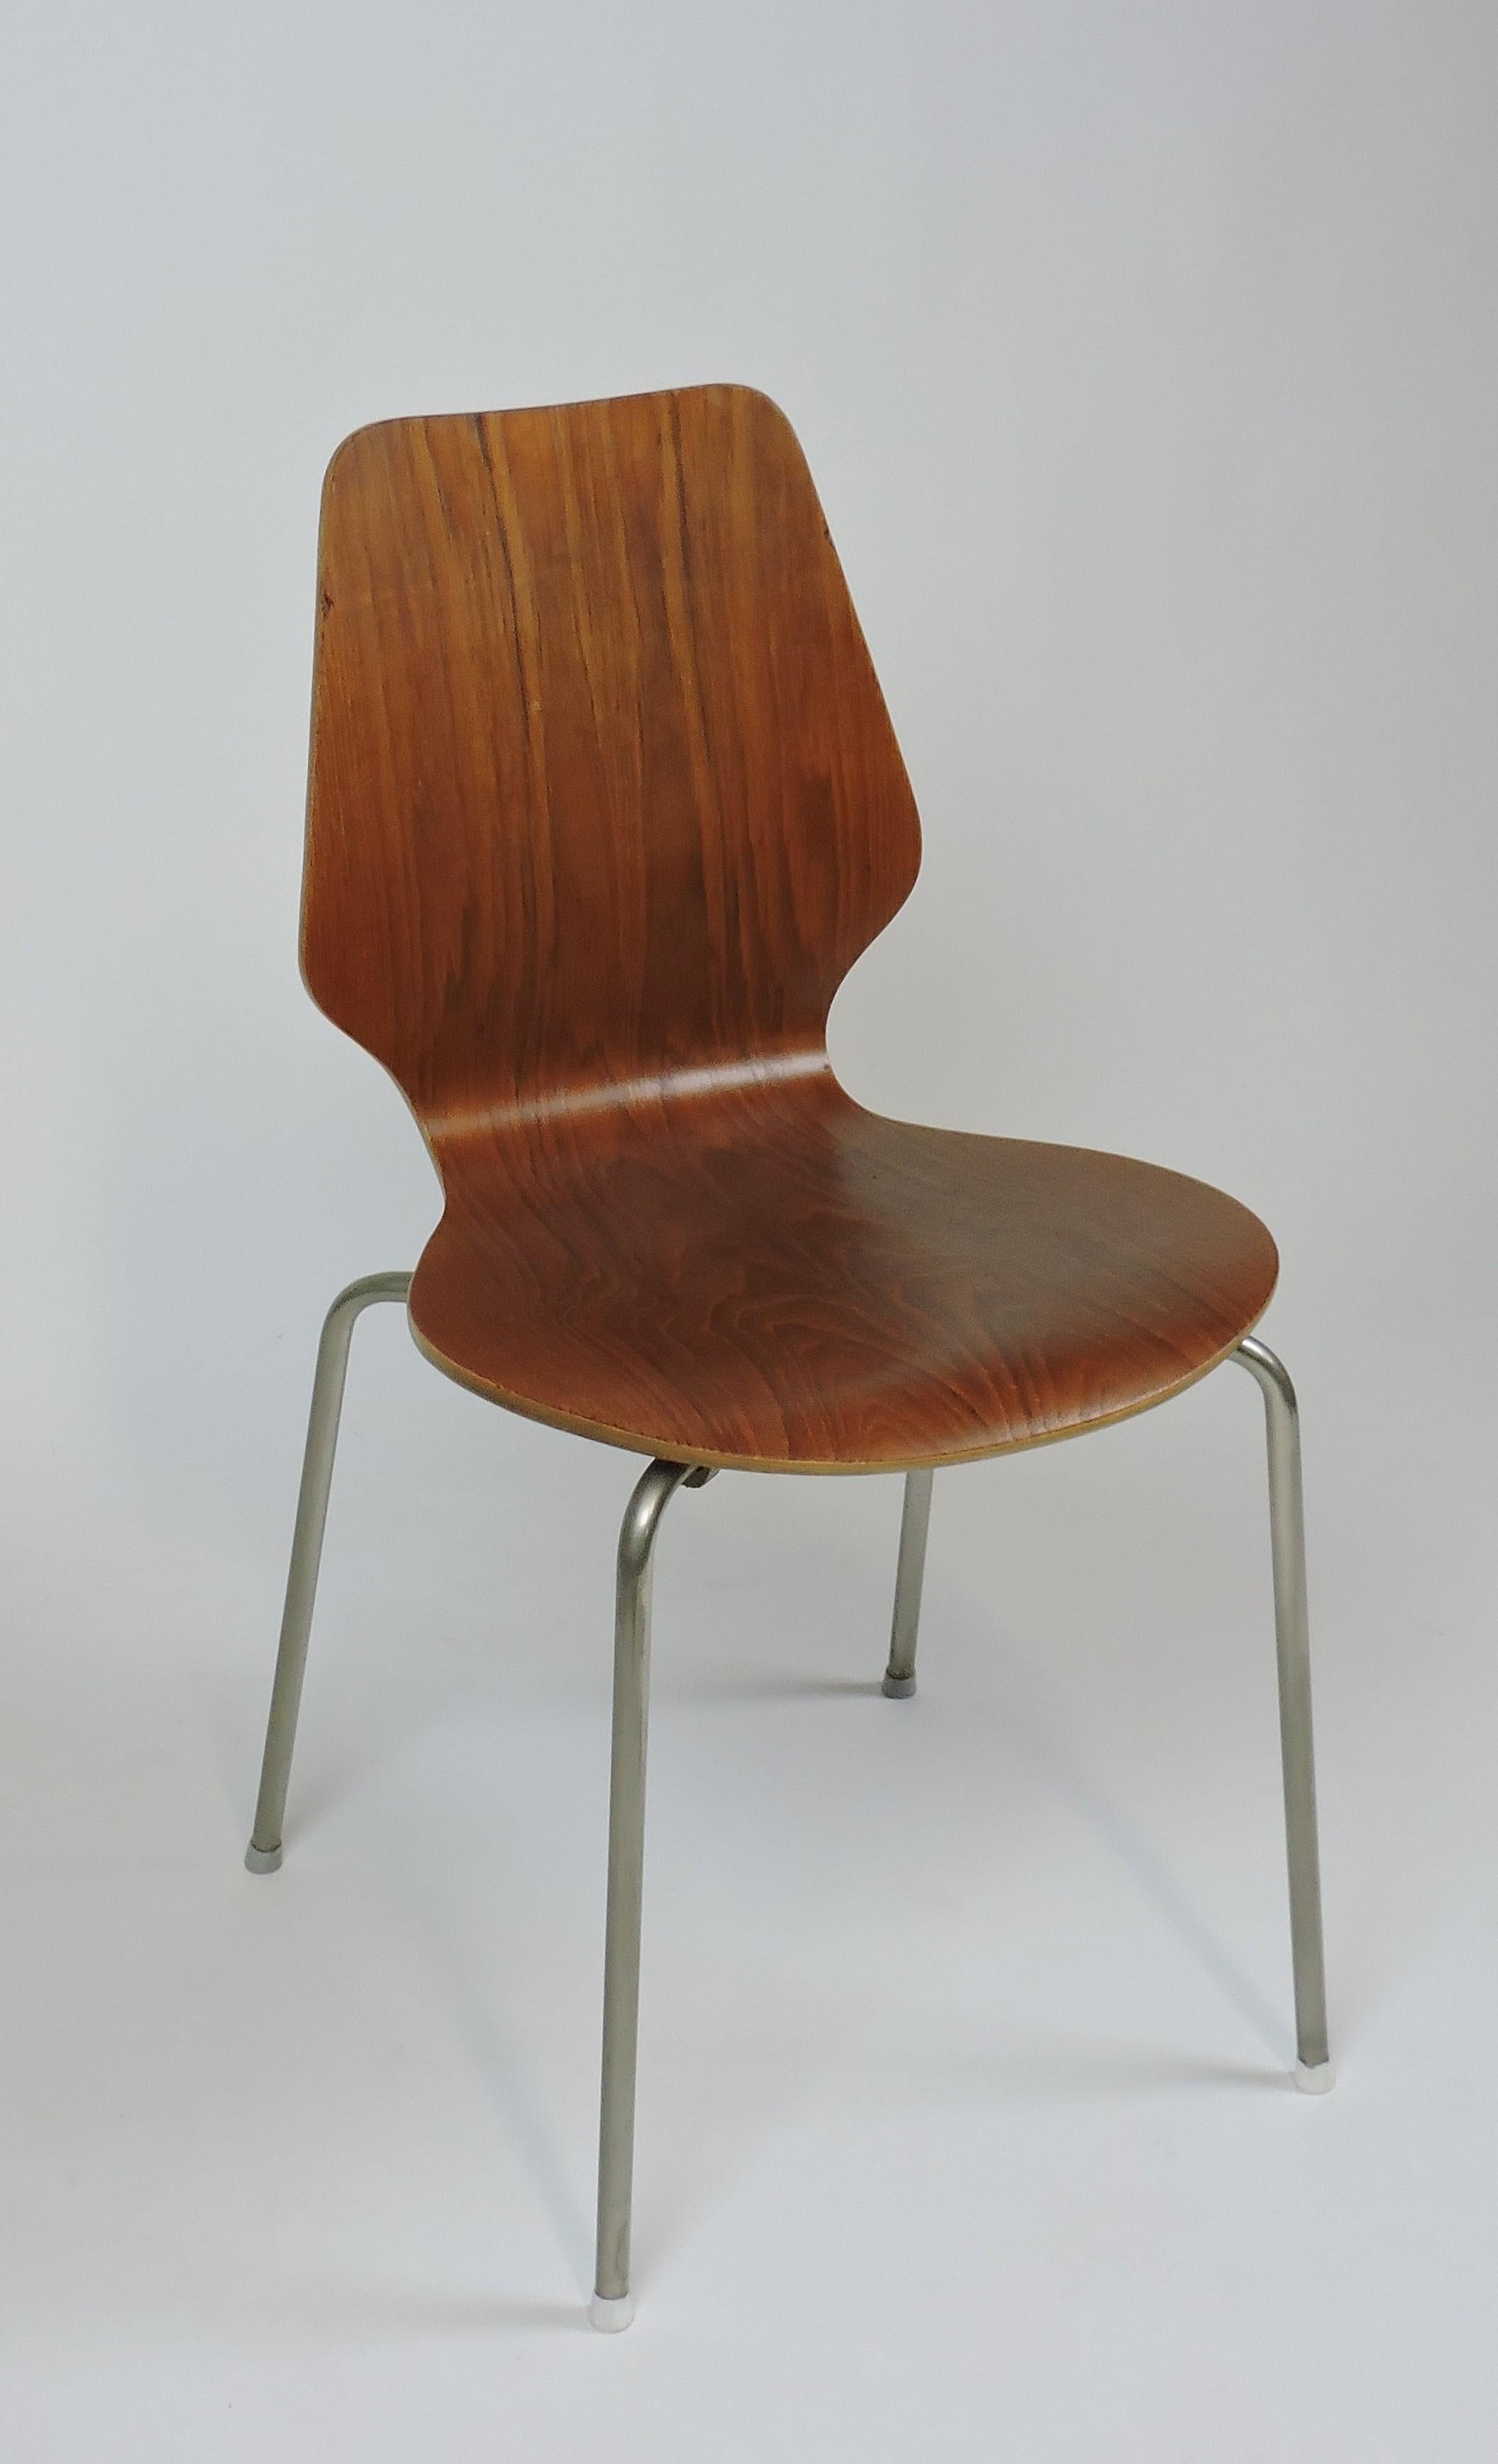 Midcentury Danish modern bentwood chair with metal legs. Lightweight and strong with beautiful wood grain. Made in Denmark stamped underneath.